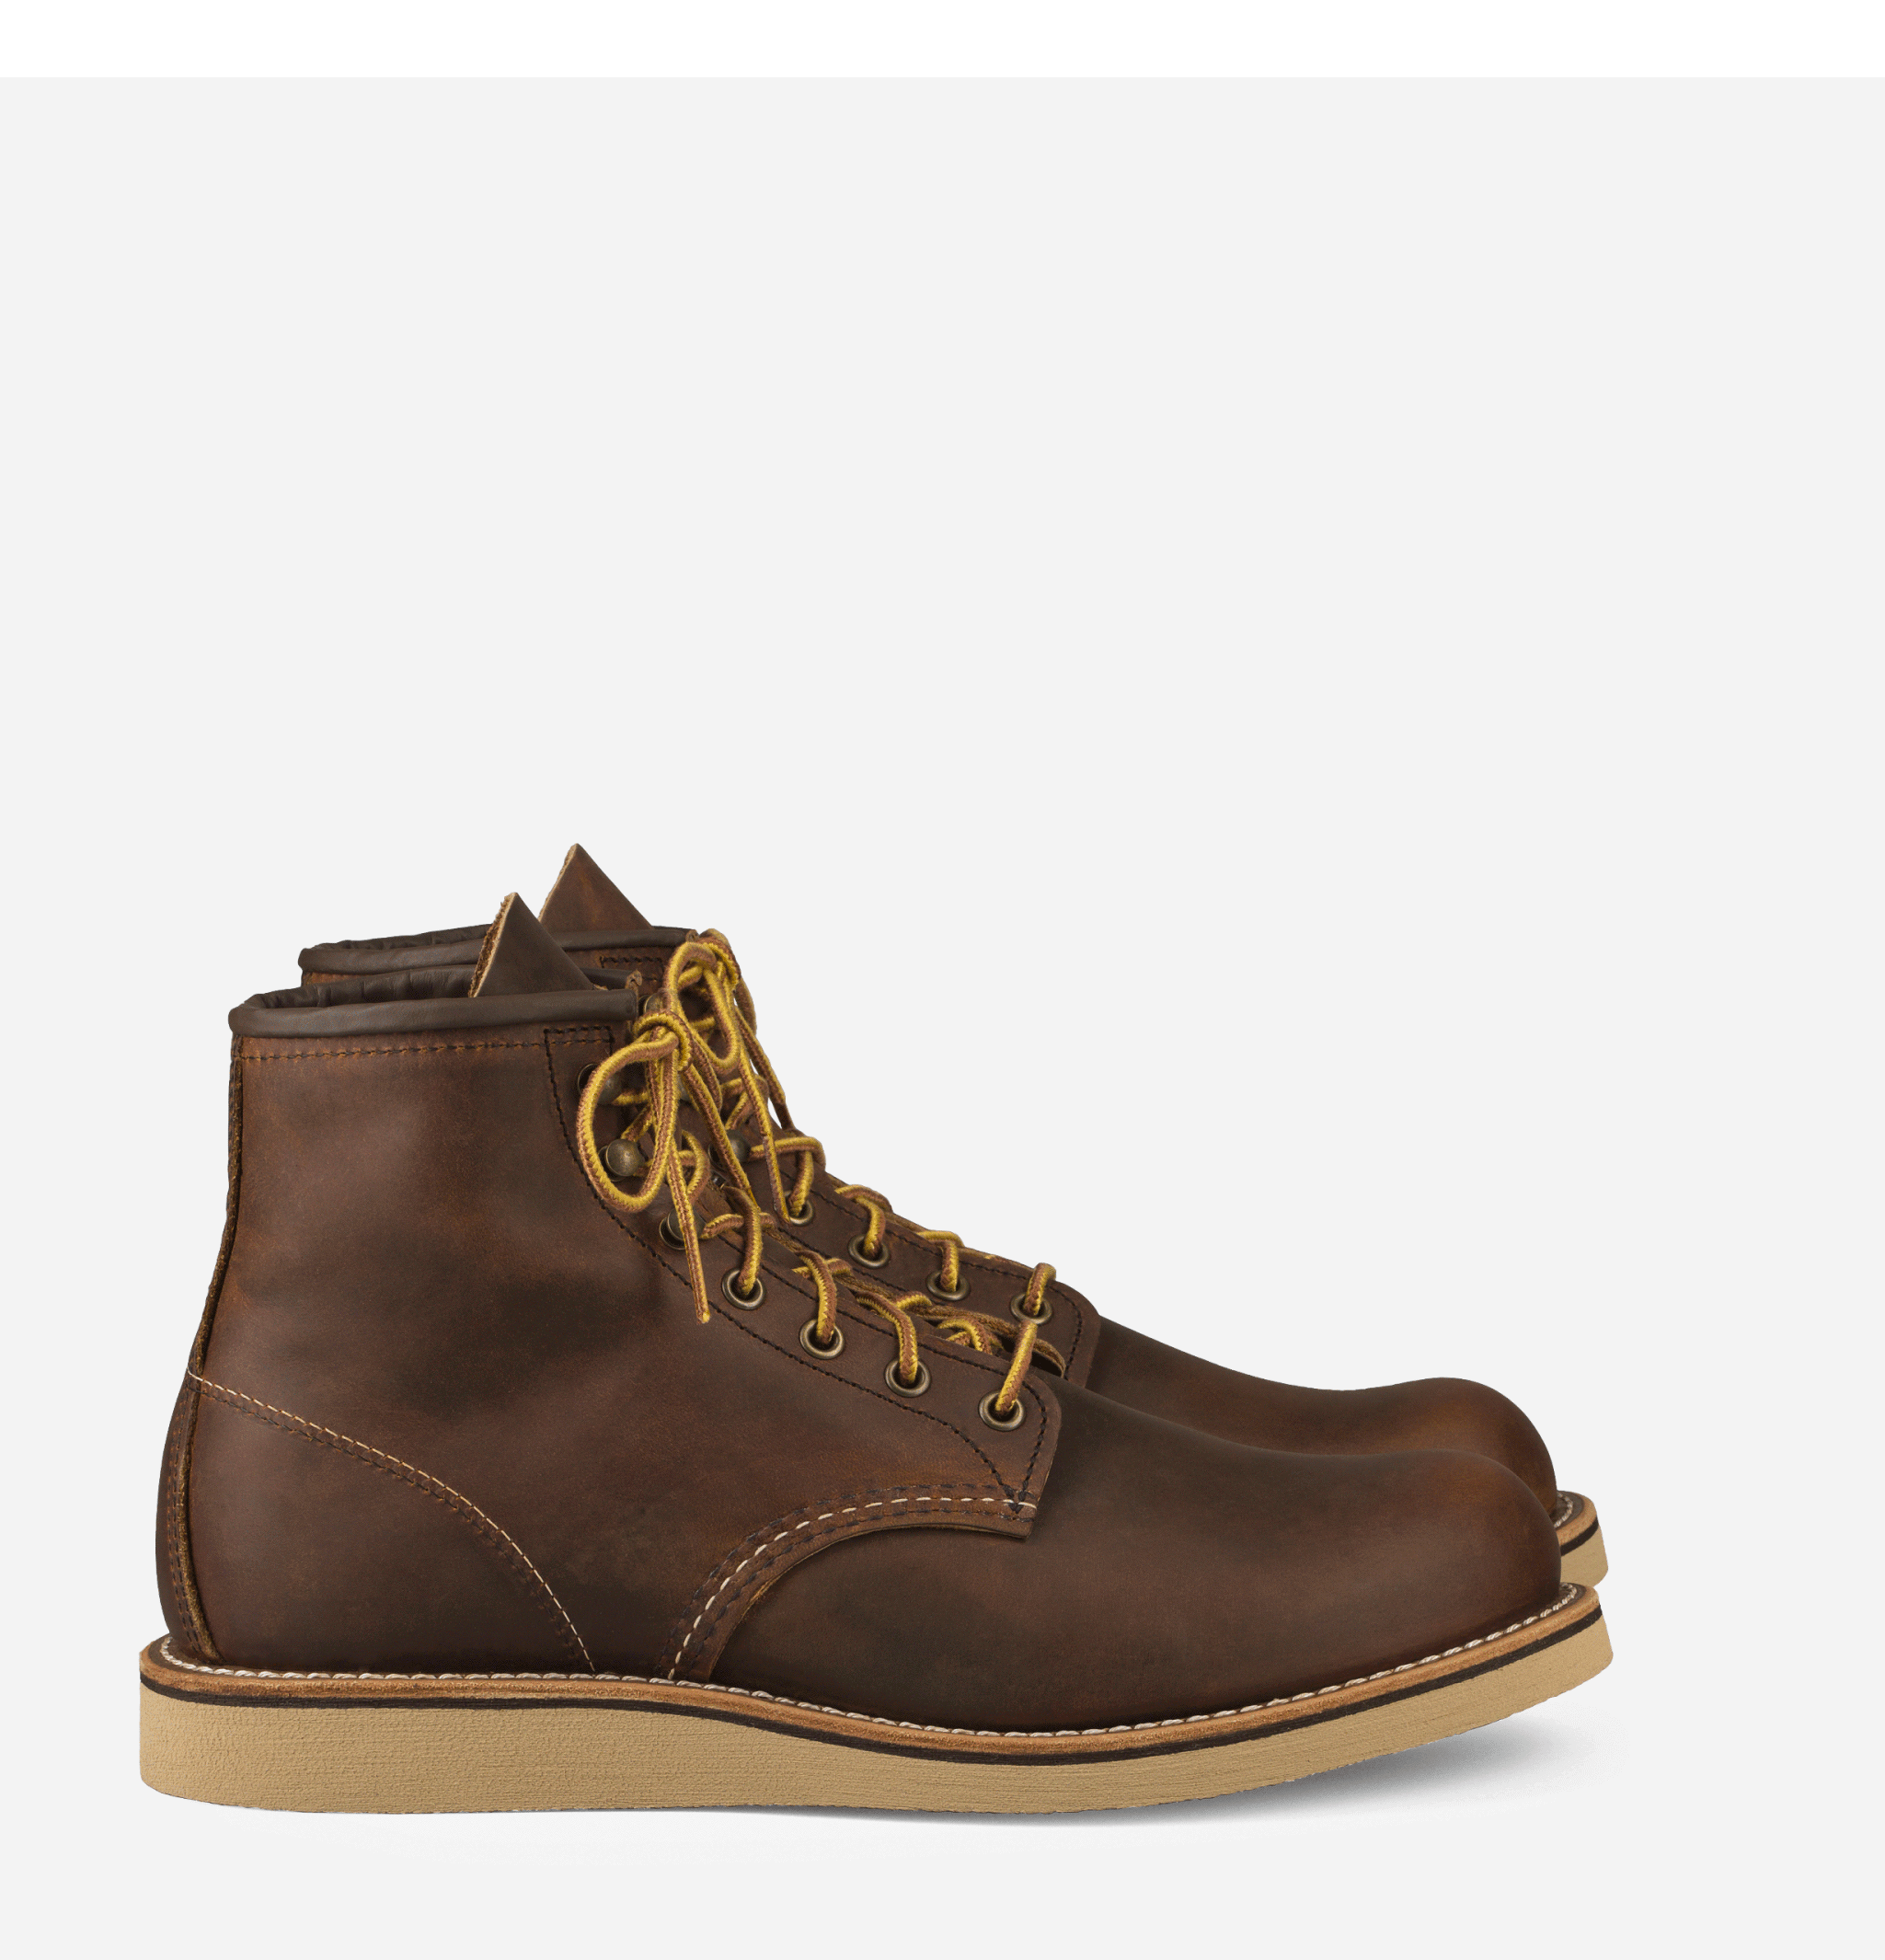 Redwing Shoes - 2950 - Boot Rover Copper